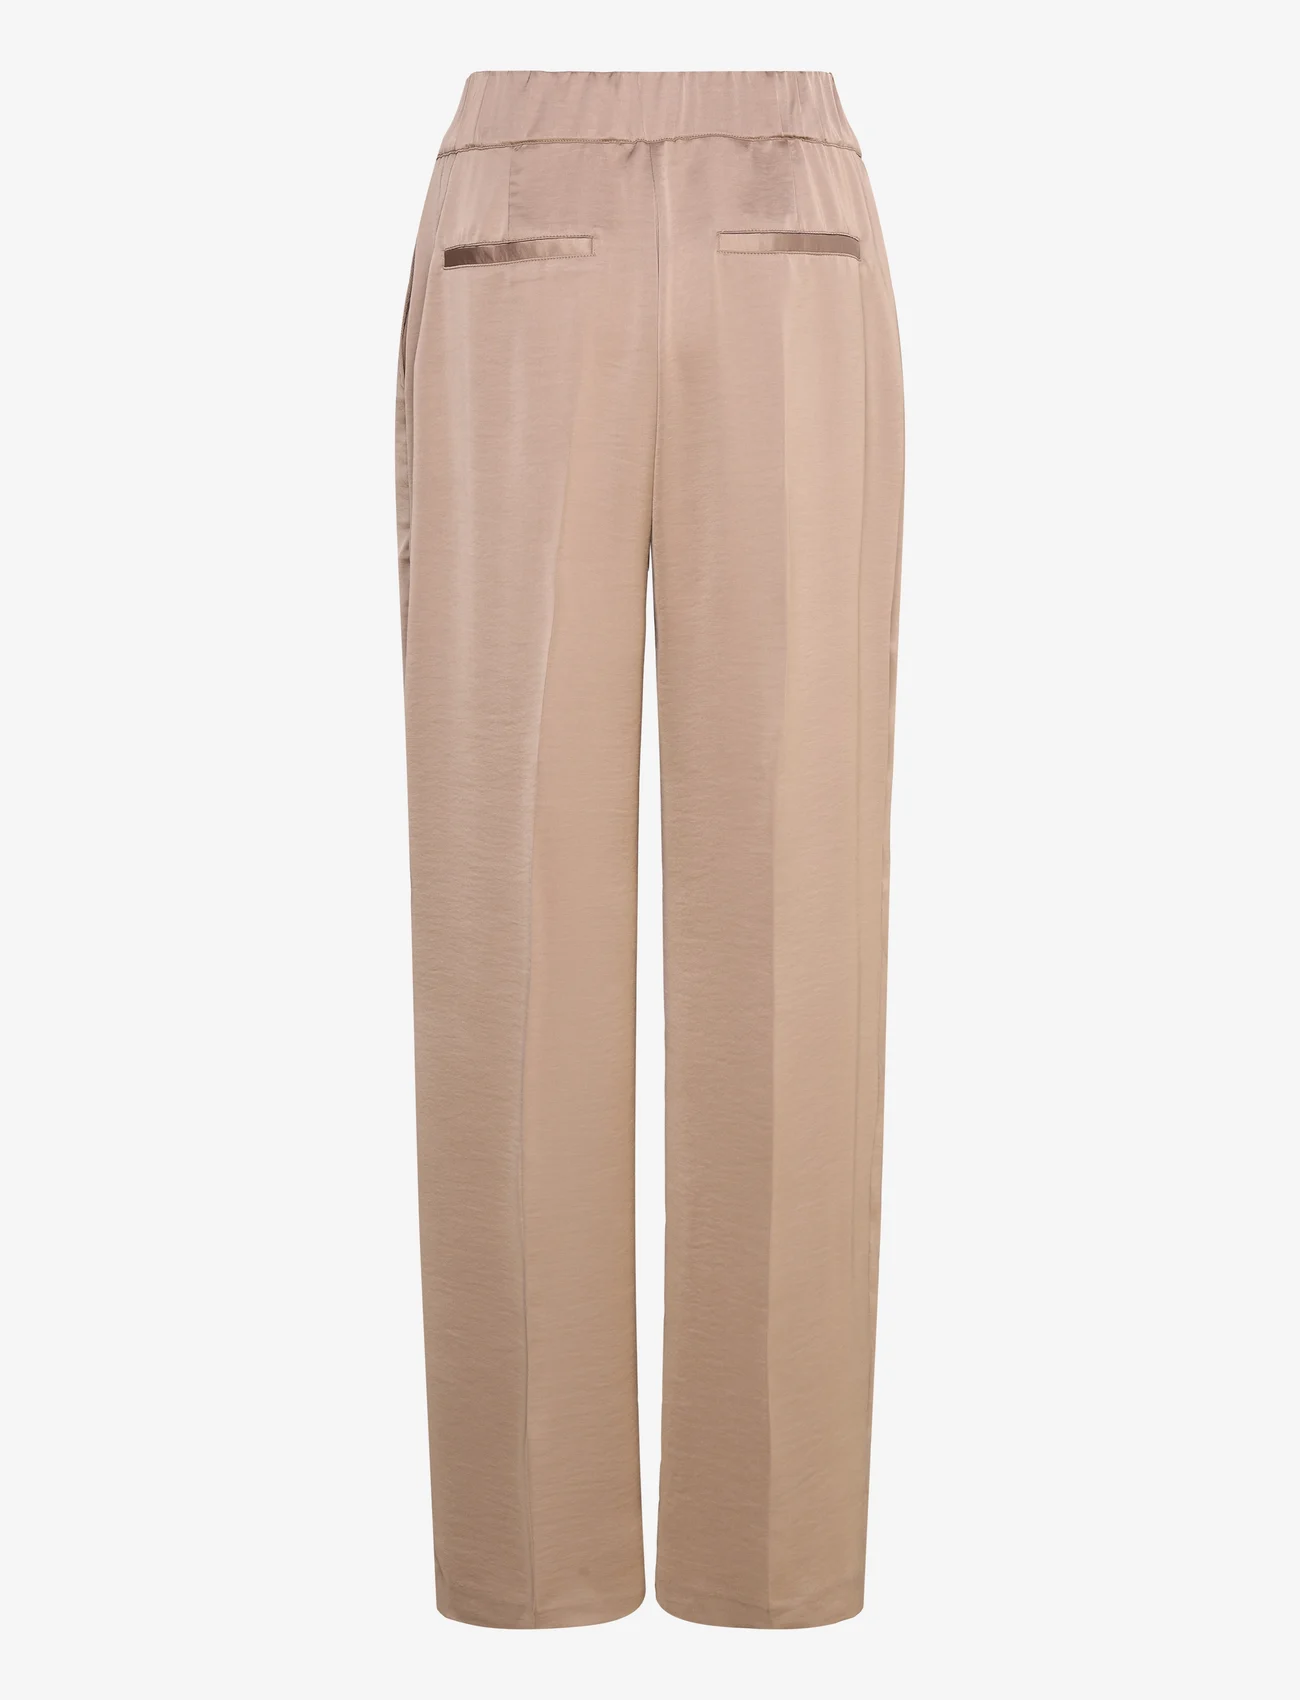 Dante6 - D6Cheers celebration pants - straight leg trousers - pink champagne - 1